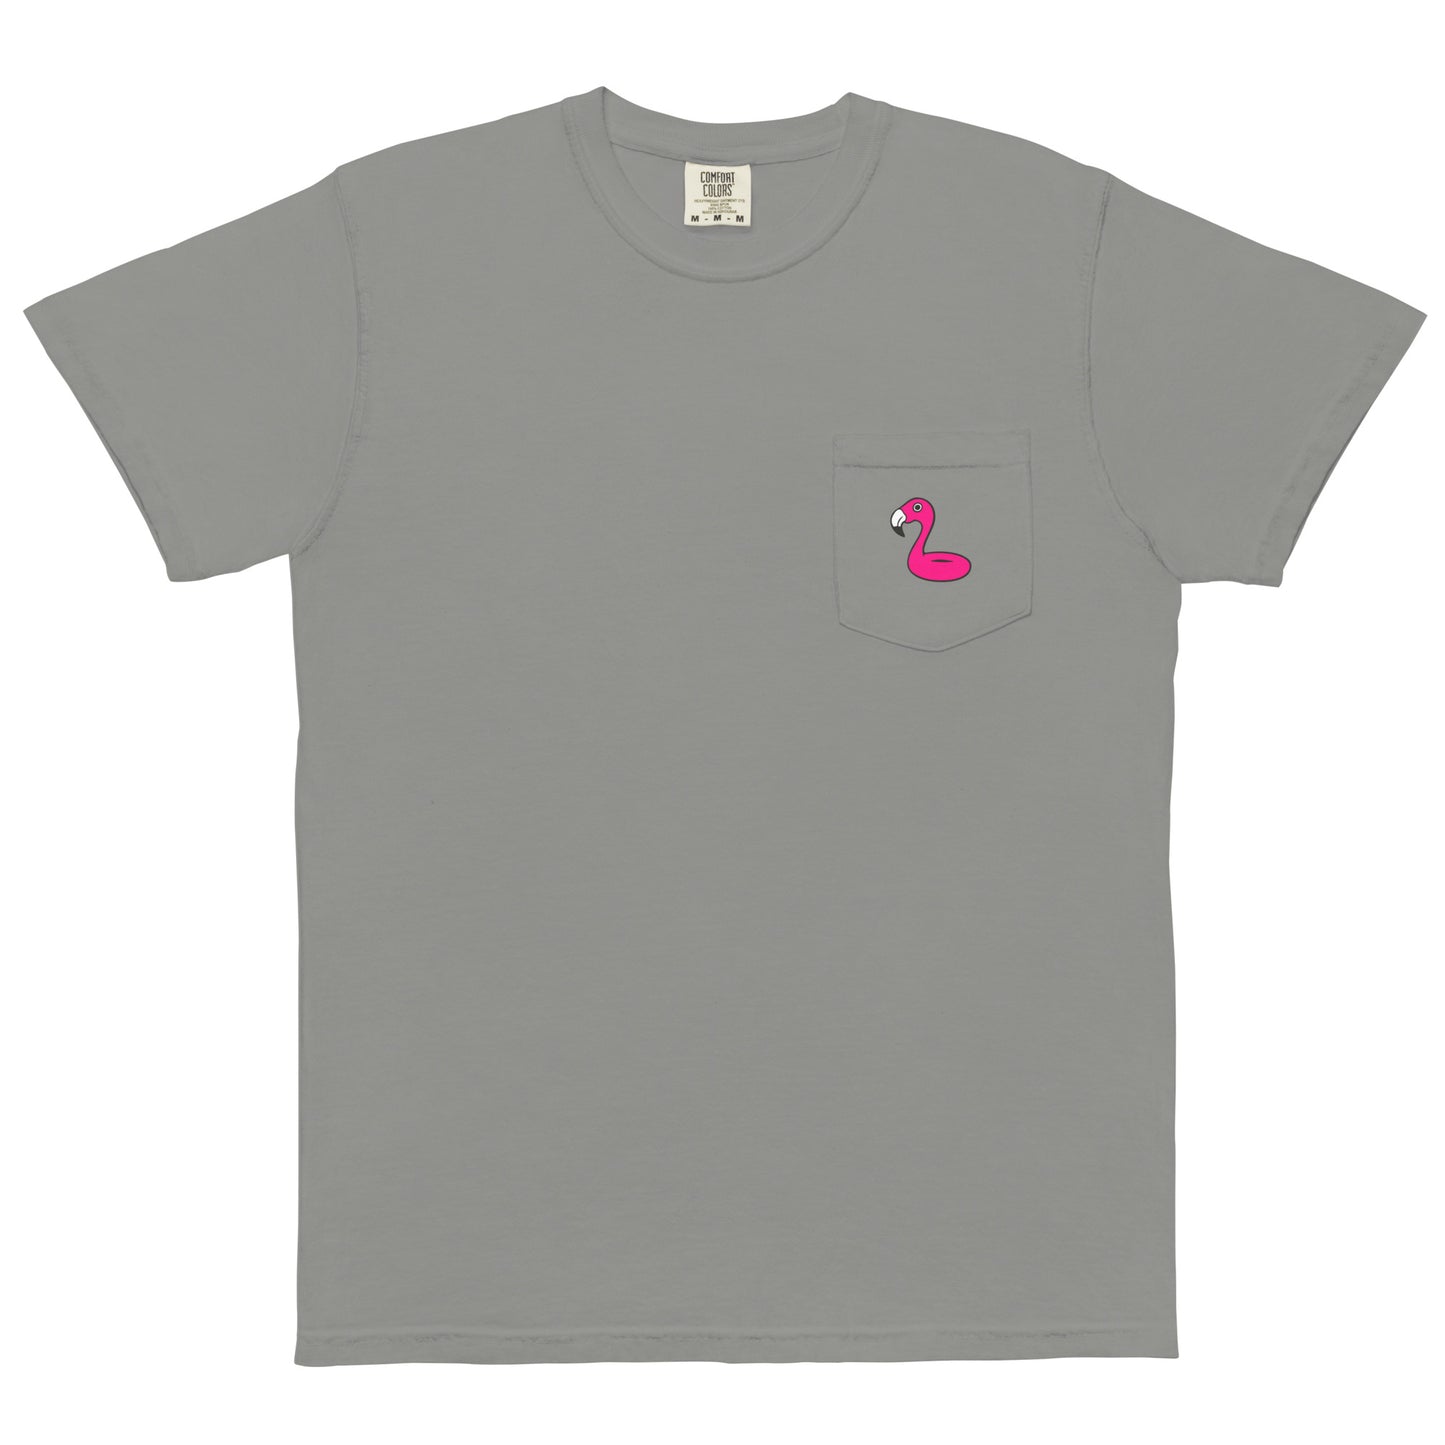 Another Day in Paradise Pocket Tee